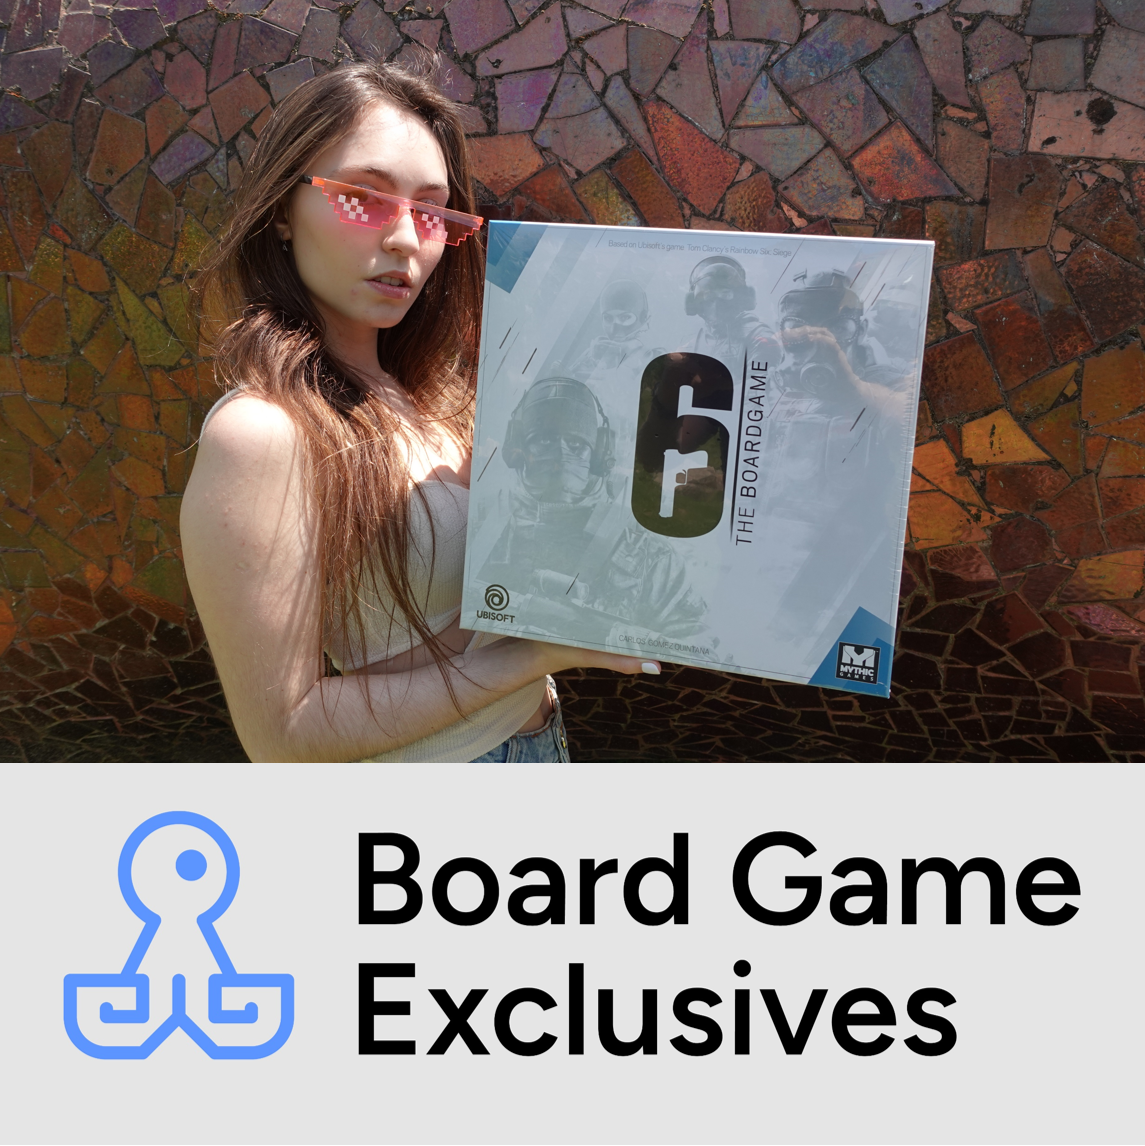 Attractive Young Girl Holding The Deluxe Storage Box From 6: Siege - The Board Game Outisde in Nature